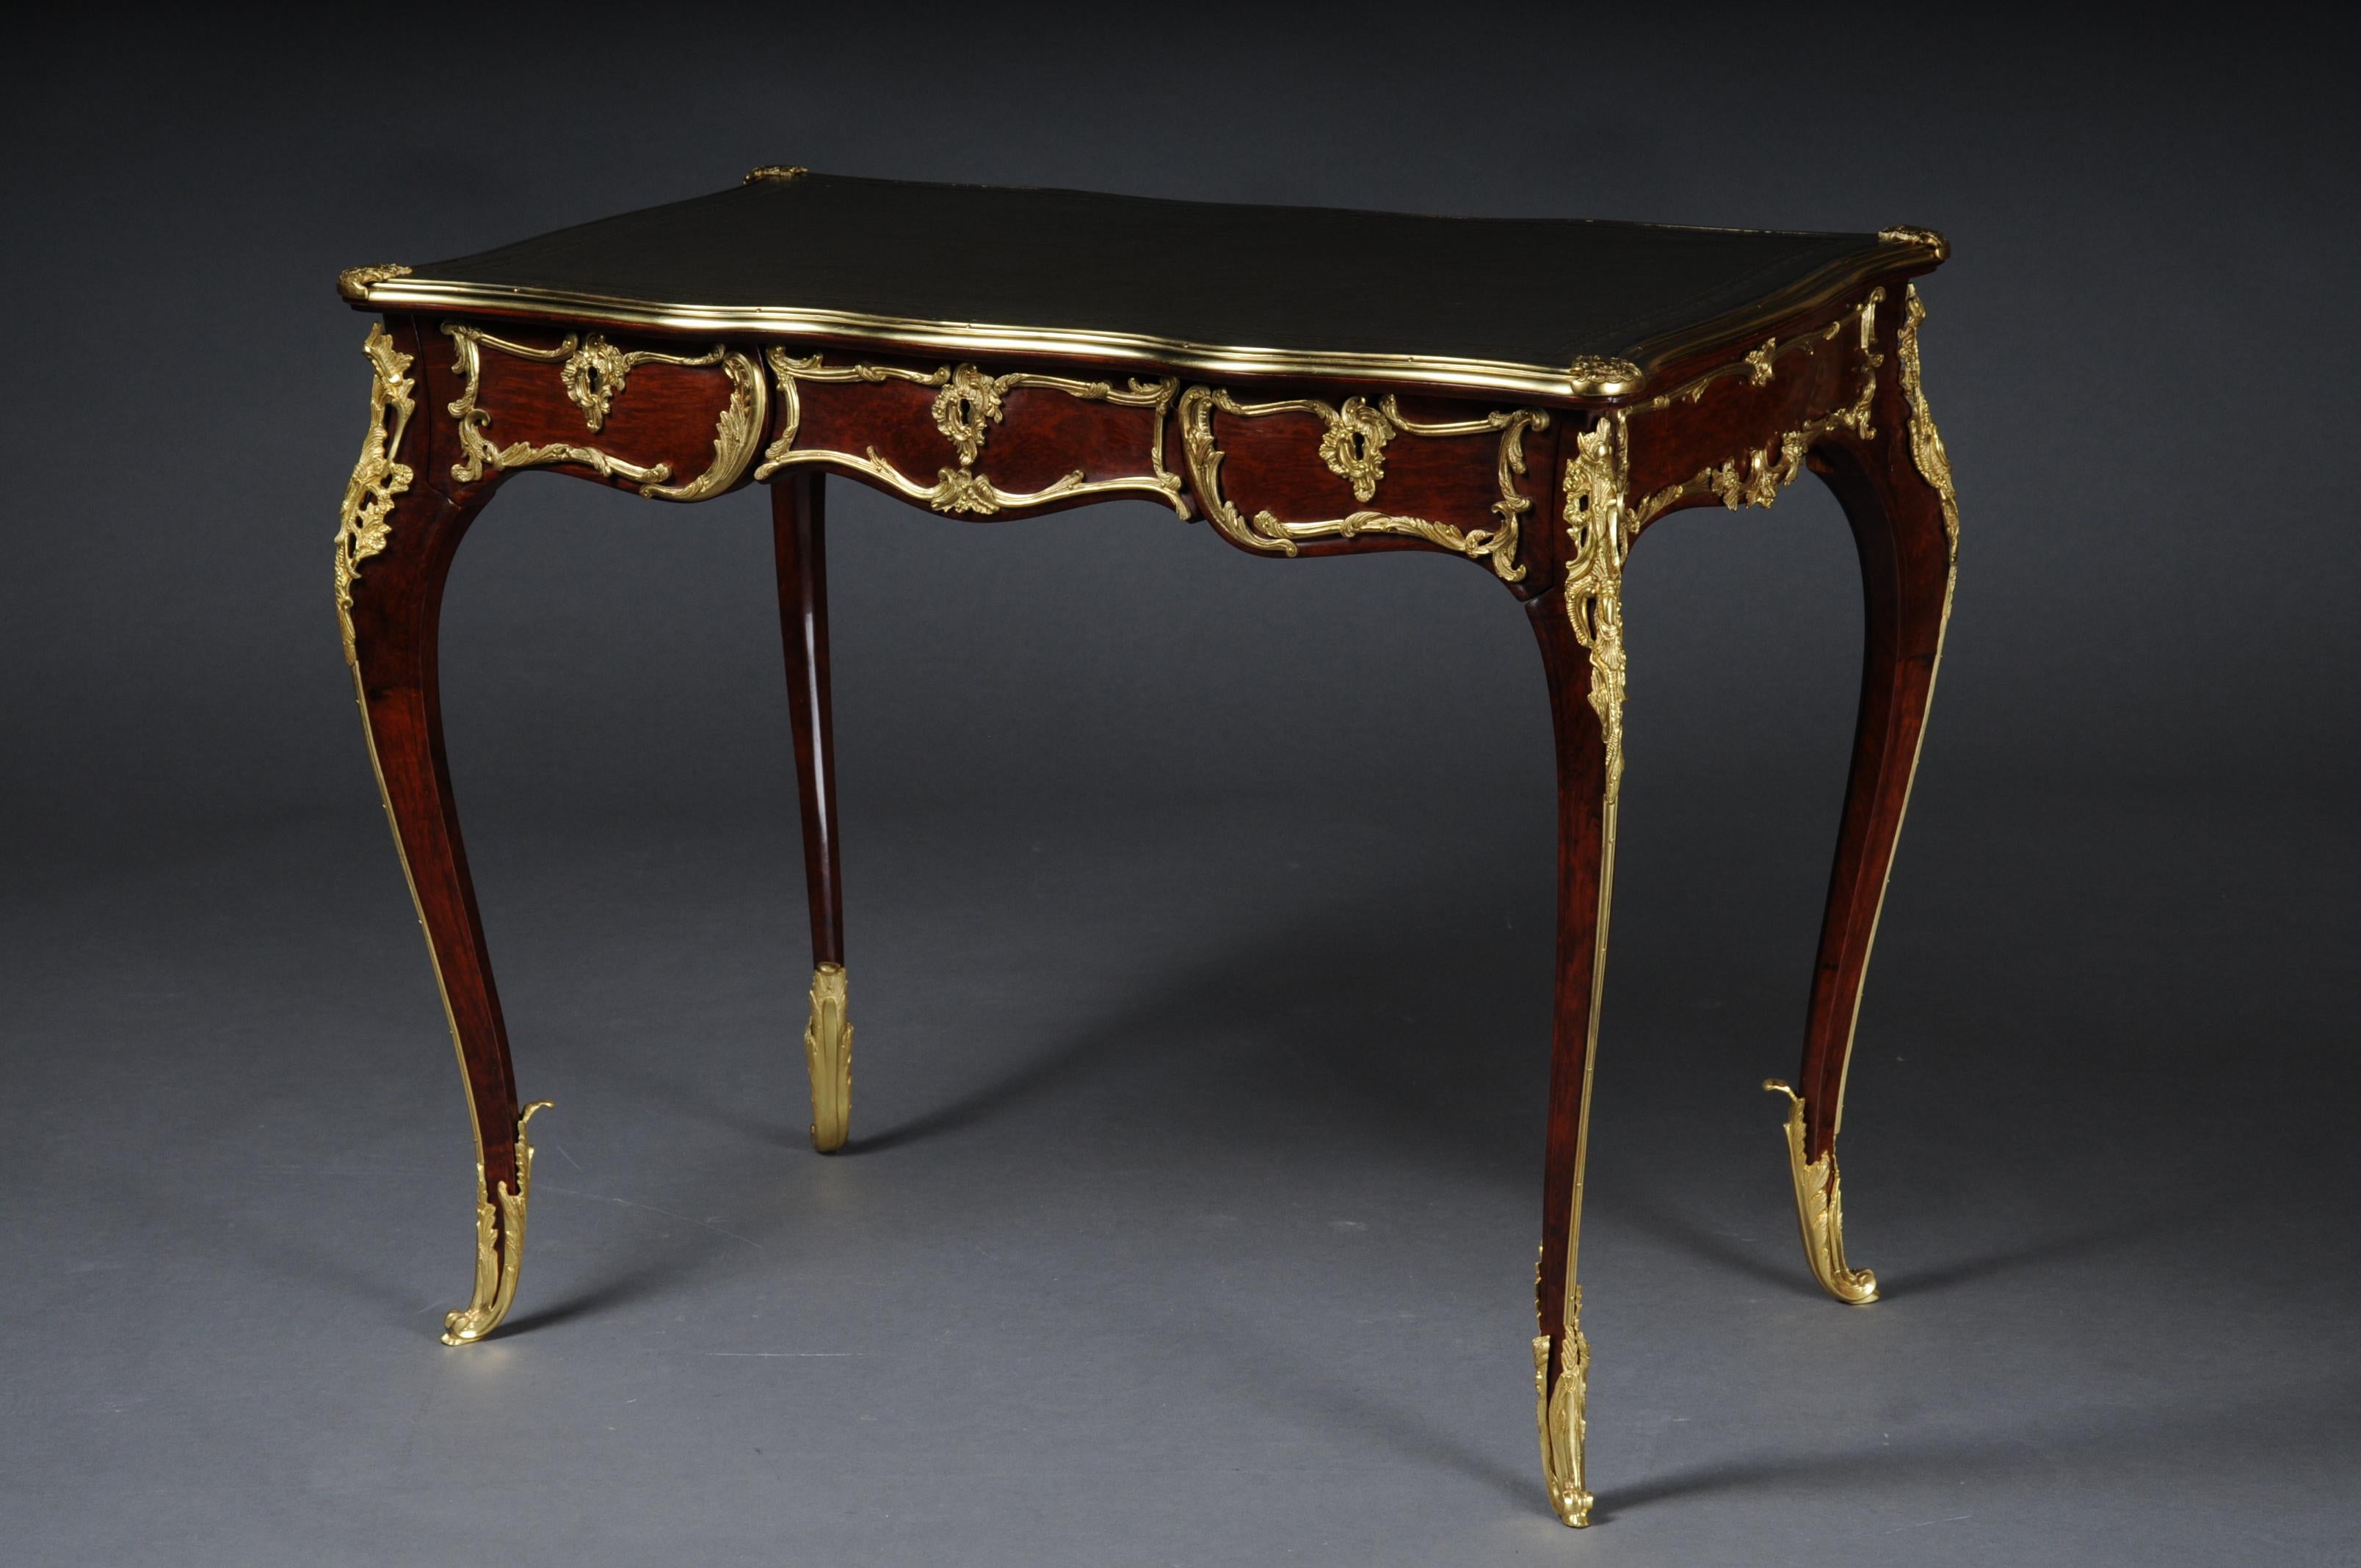 Elegant veneered bureau plat or desk in Louis XV style

Solid beechwood and veneer. Very fine, floral bronze fittings.
Curved and pronounced or arched wooden body. Frame base with four-sided curvature.
3 drawers and wide knee compartment ending